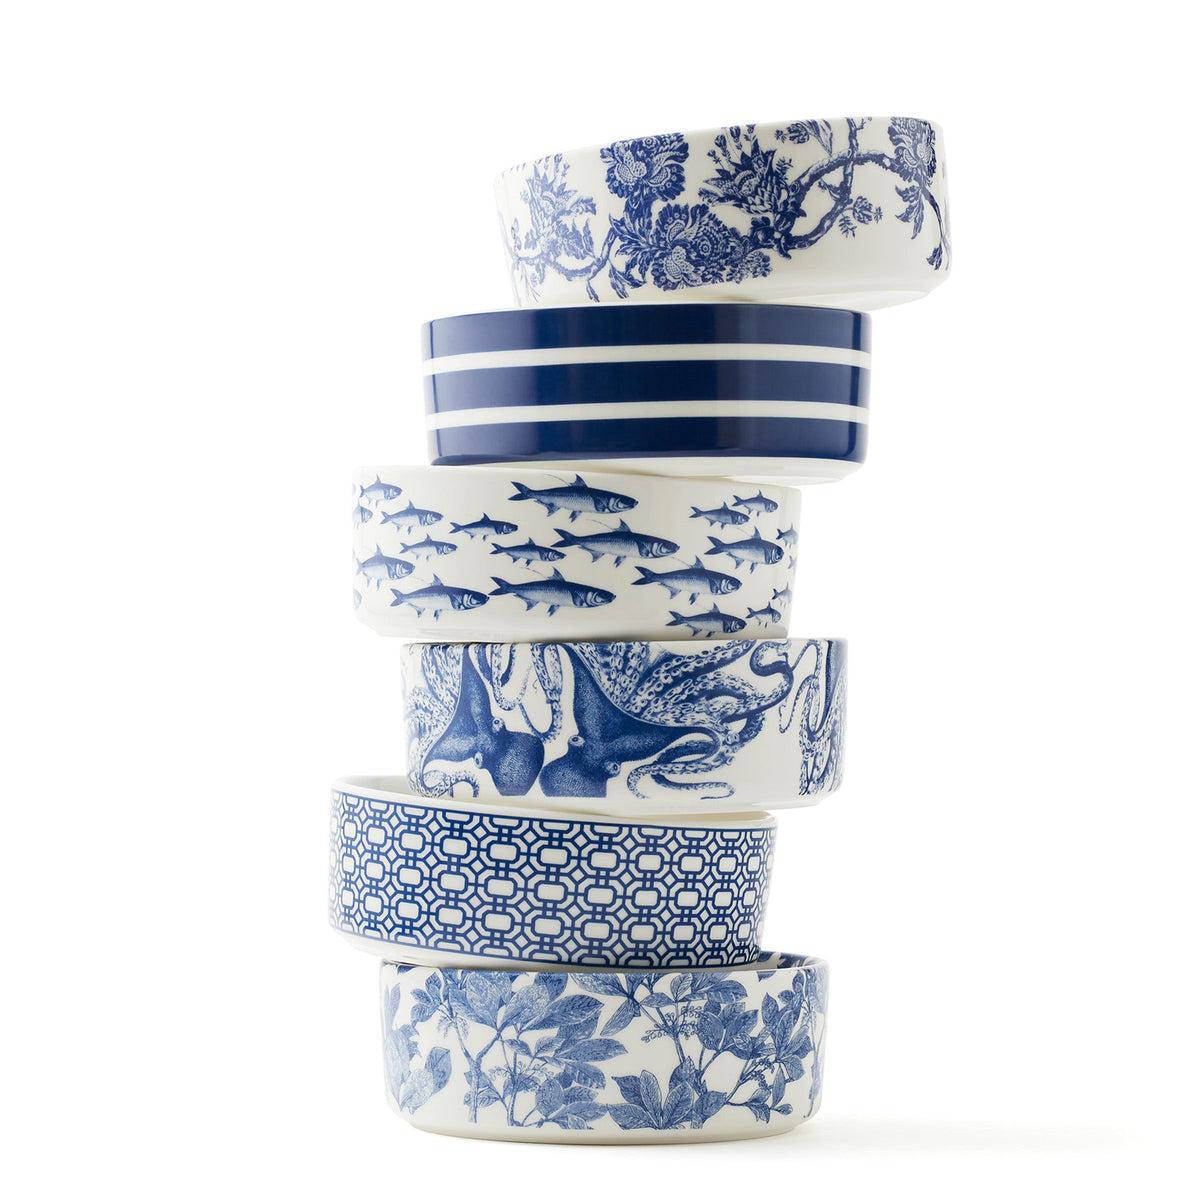 A stack of Caskata School of Fish Medium Pet Bowls, made of premium porcelain blue and white, stacked on top of each other, perfect for serving fish.